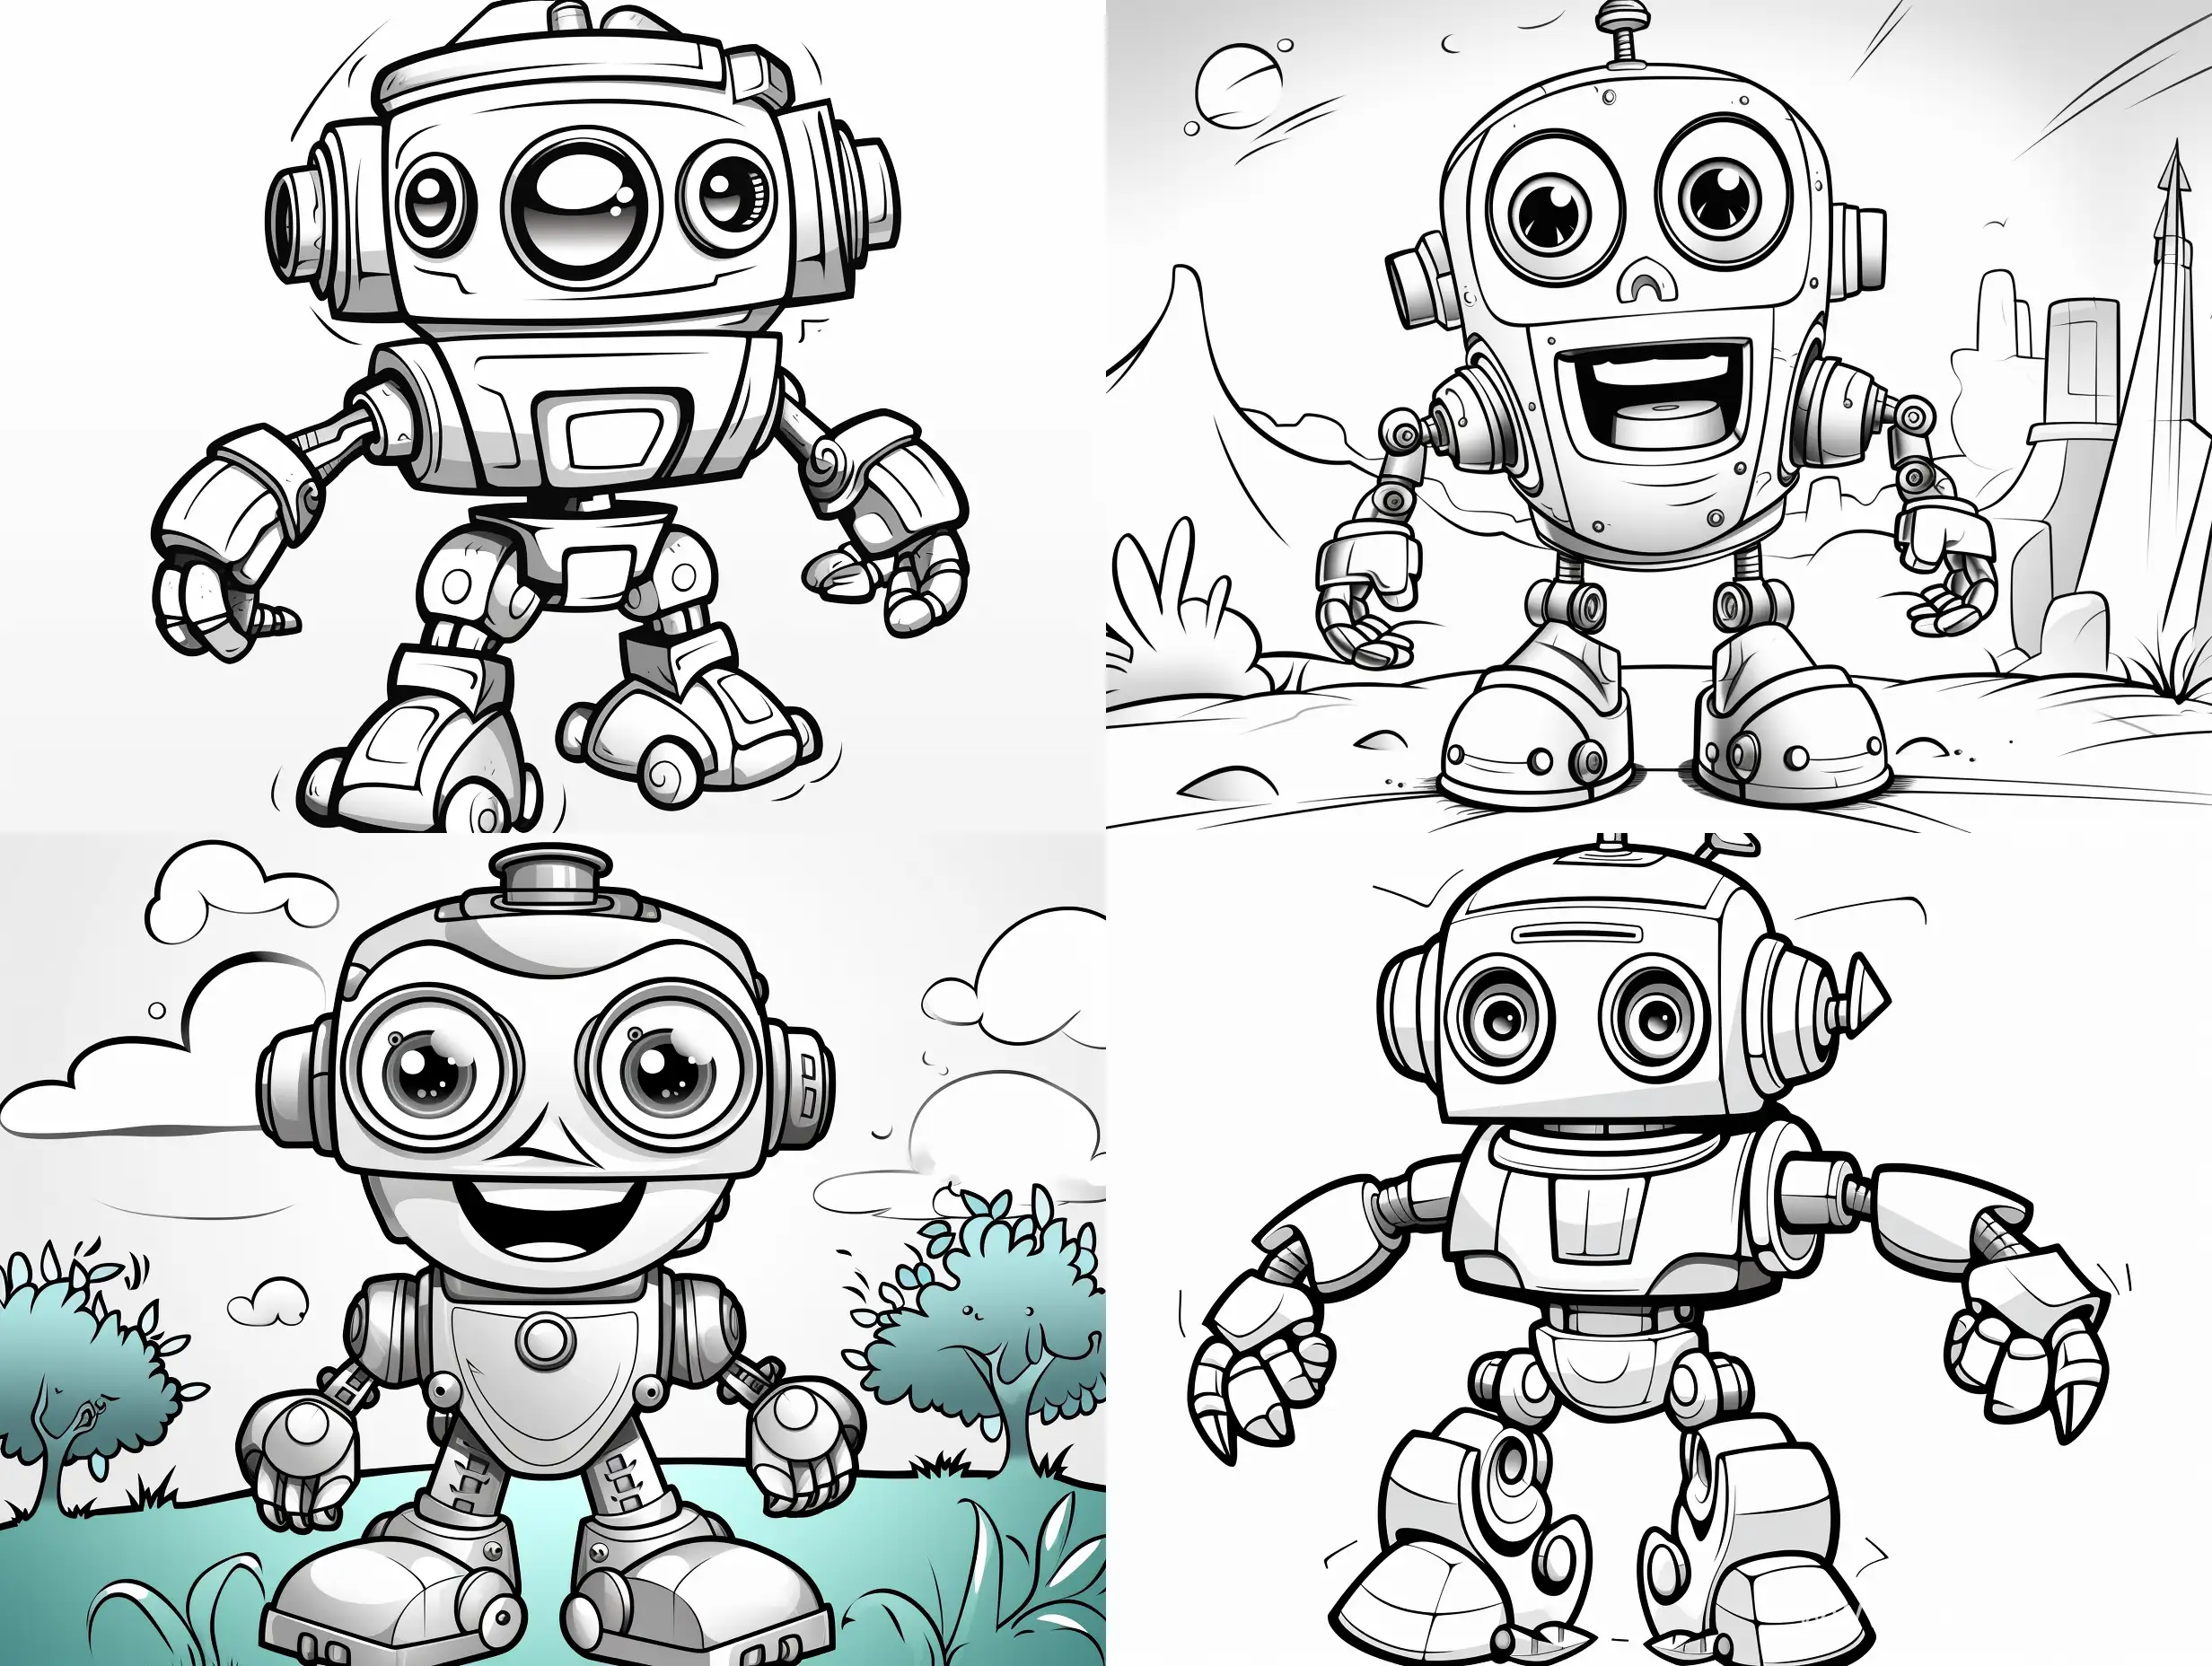 Cheerful-Robot-Cartoon-Coloring-Page